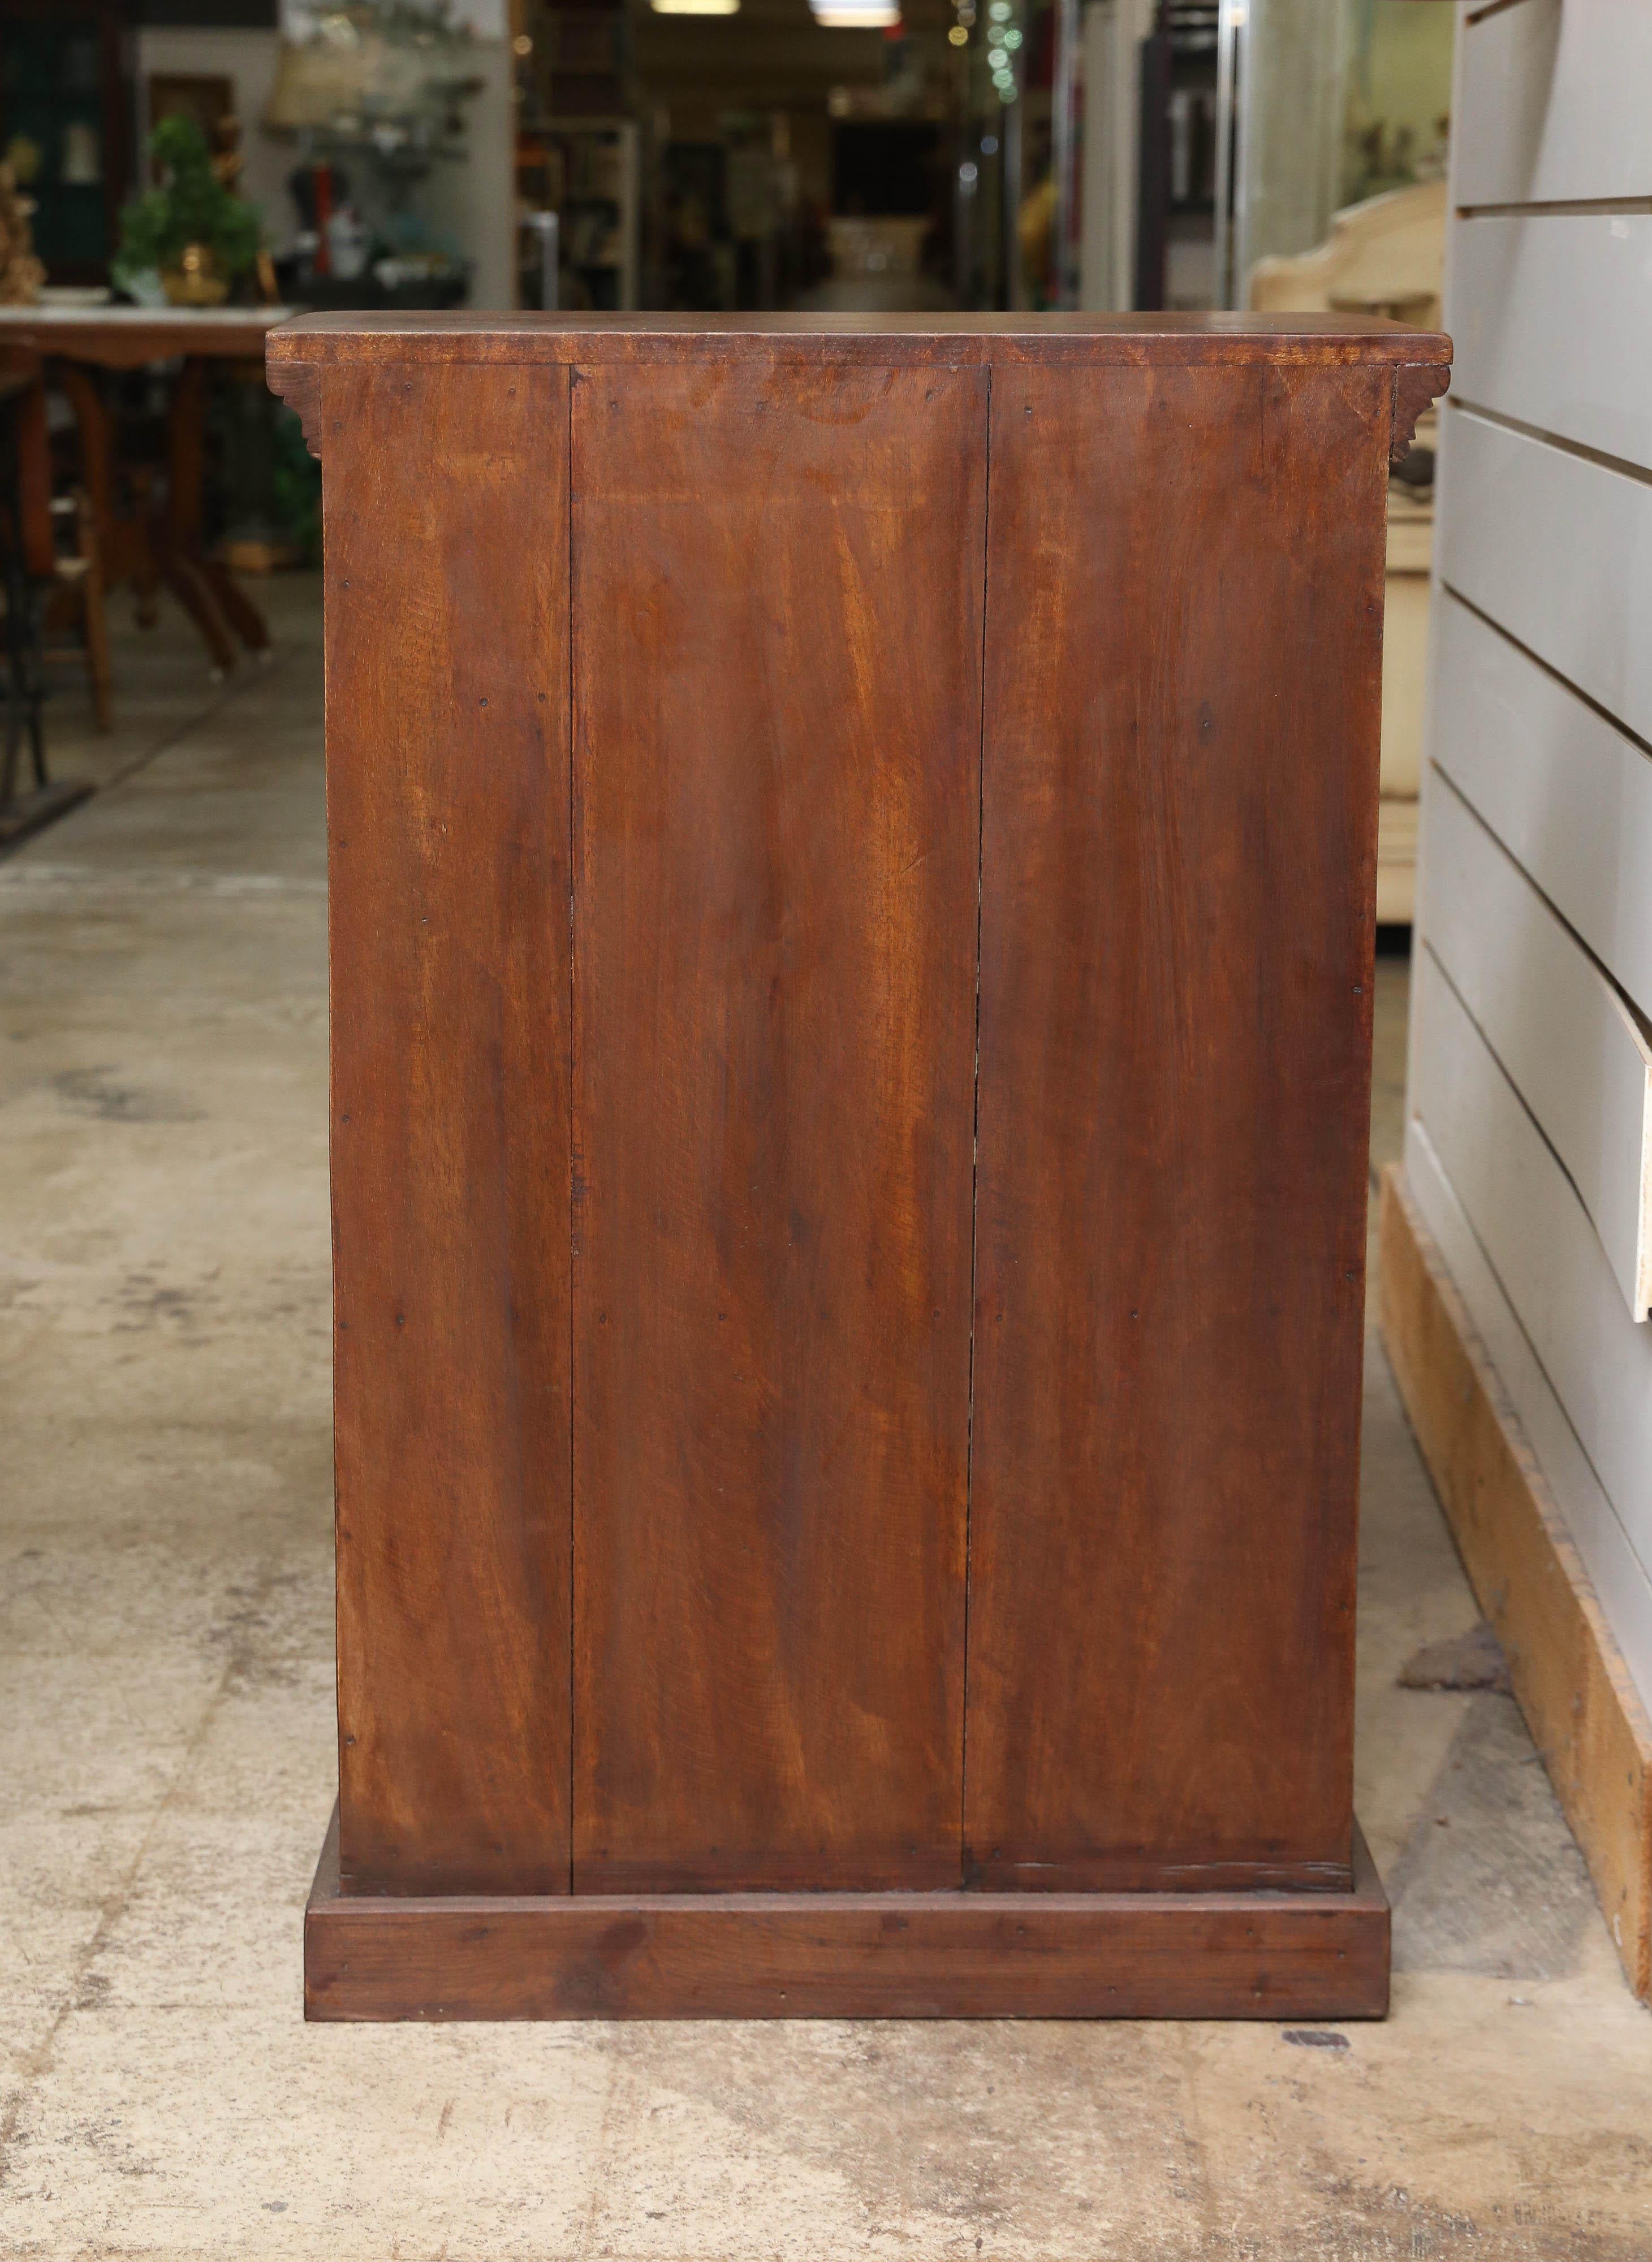 Pair of Highly Decorative Solid Teak Wood Nightstands from Plantation Homes 2